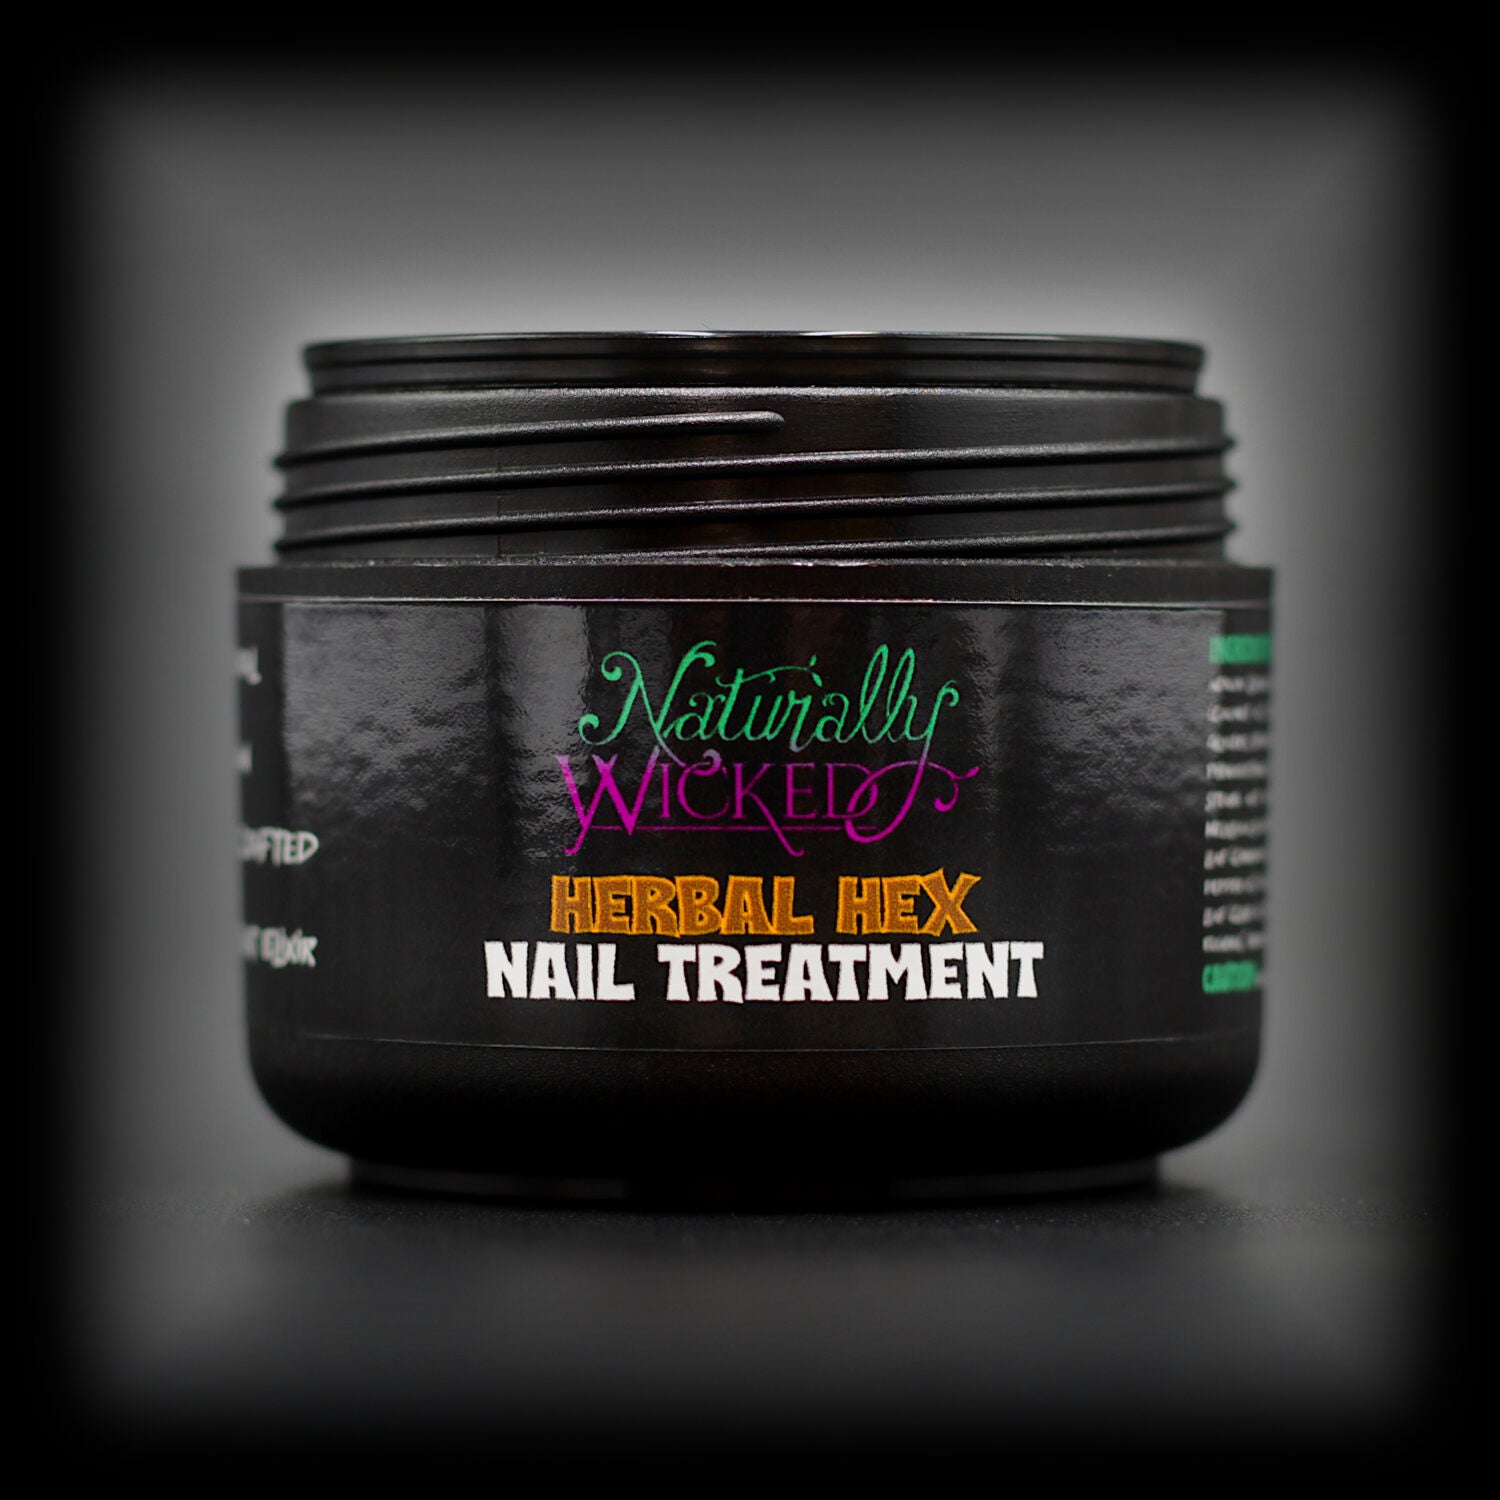 Naturally Wicked All-In-One Herbal Hex Nail Treatment For Nail Strength & Repair With No Lid & Exposed Lid Seal